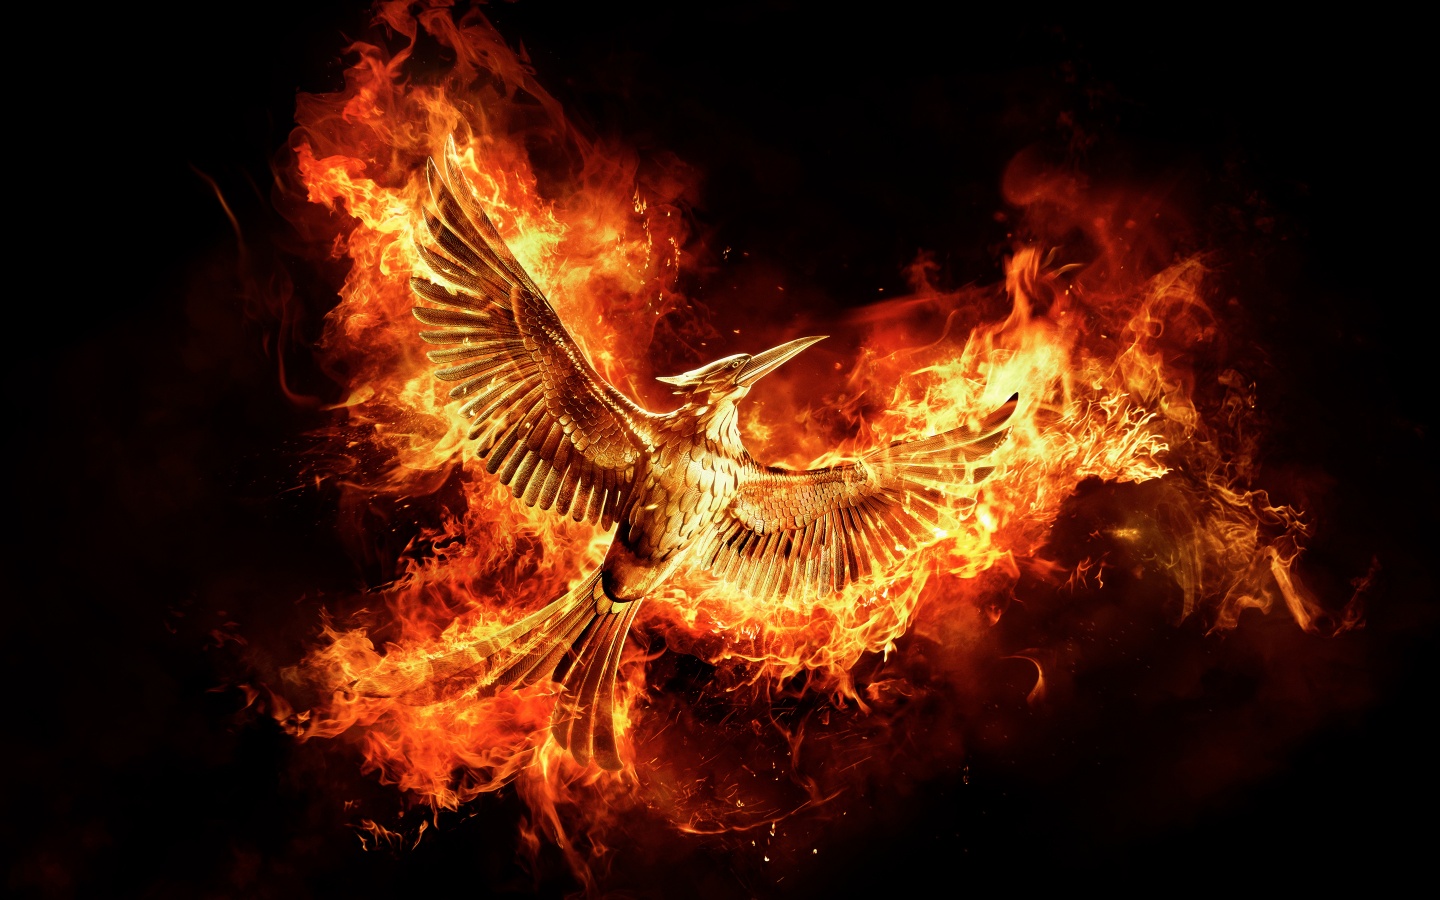 Hunger Games Mockingjay Part 2 Wallpapers HD Wallpapers 1440x900